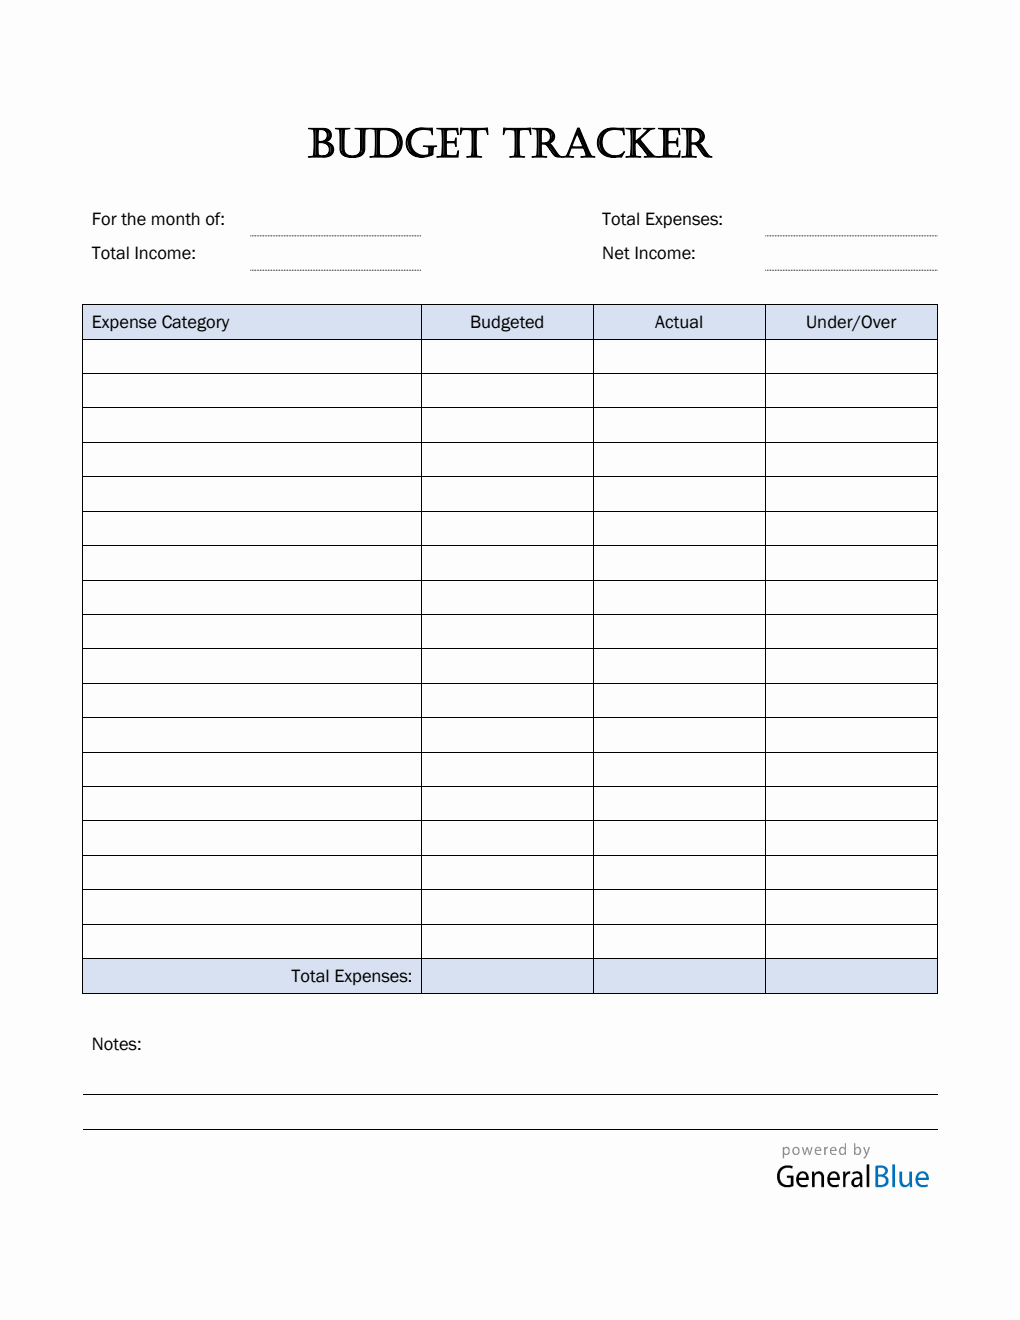 Simple Budget Tracker in Word